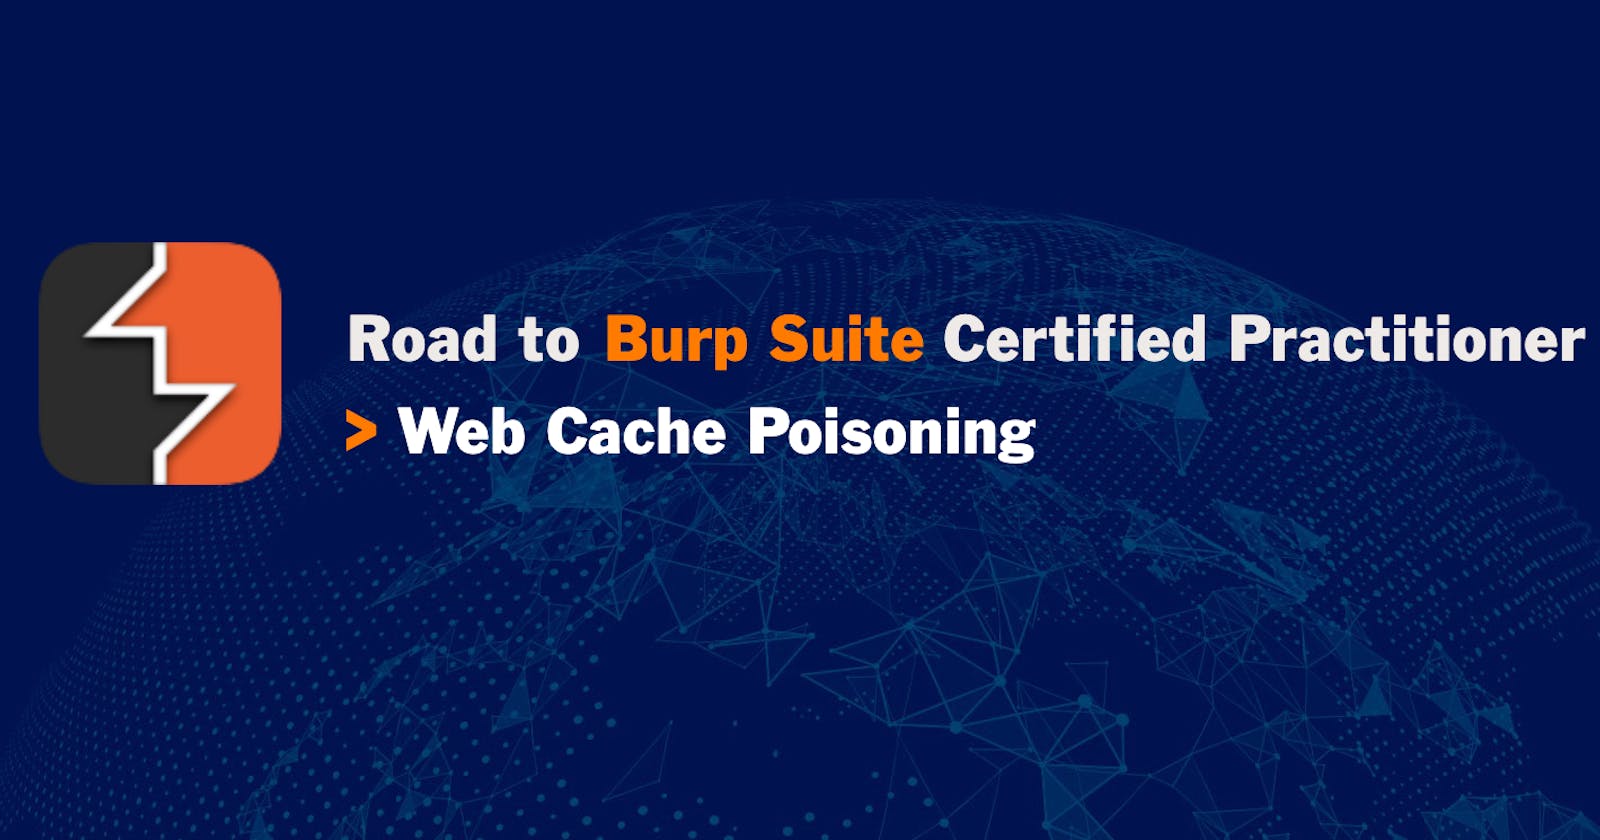 Road to BSCP - Web Cache Poisoning